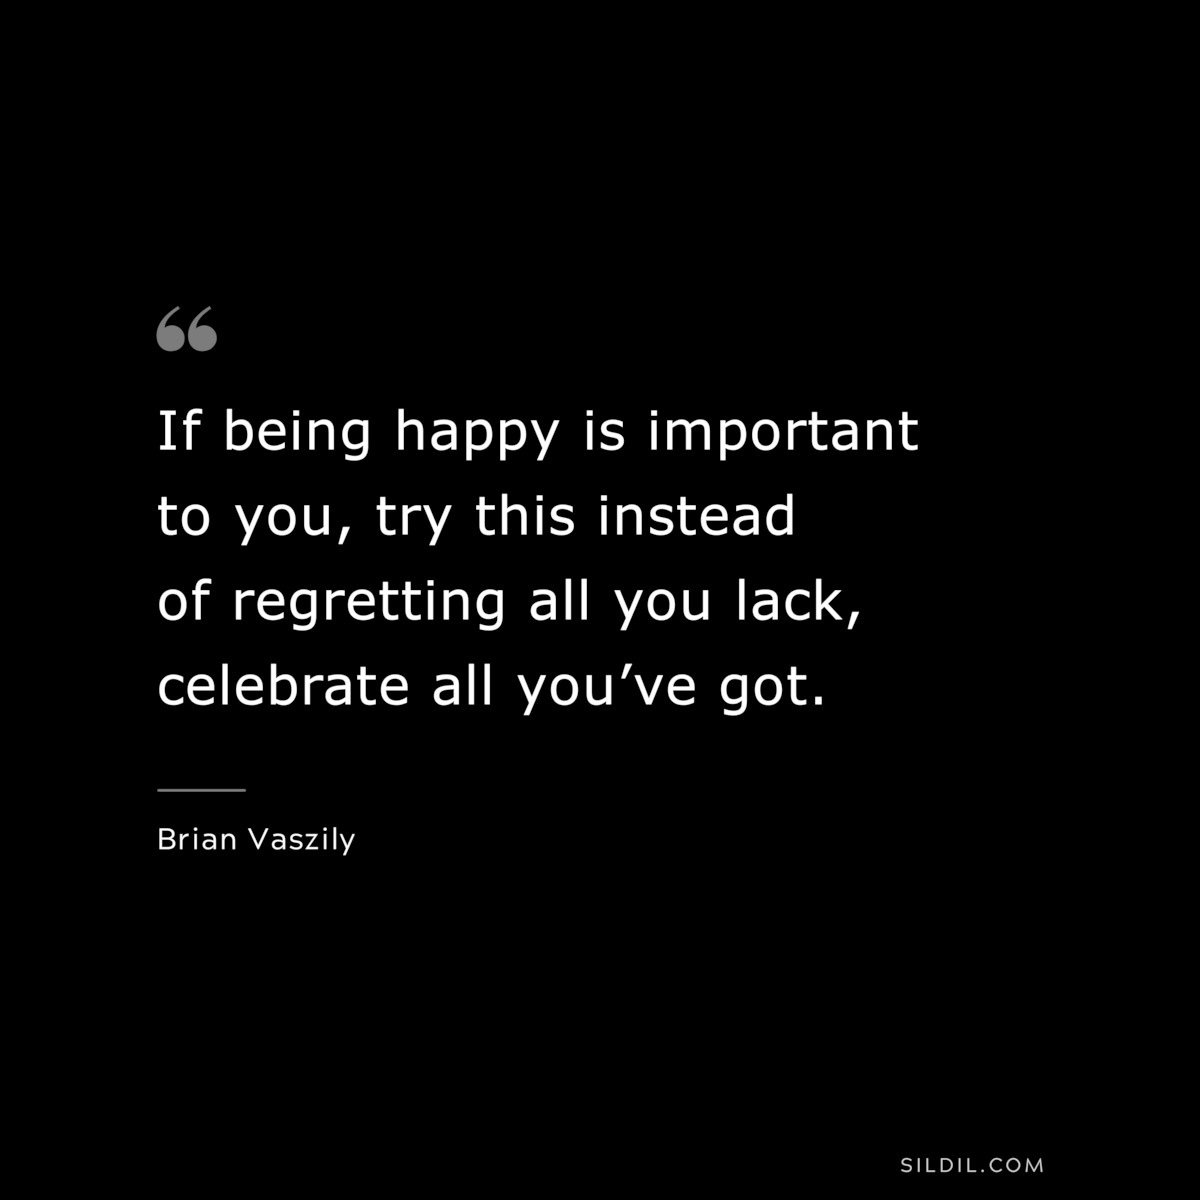 If being happy is important to you, try this instead of regretting all you lack, celebrate all you’ve got. ― Brian Vaszily